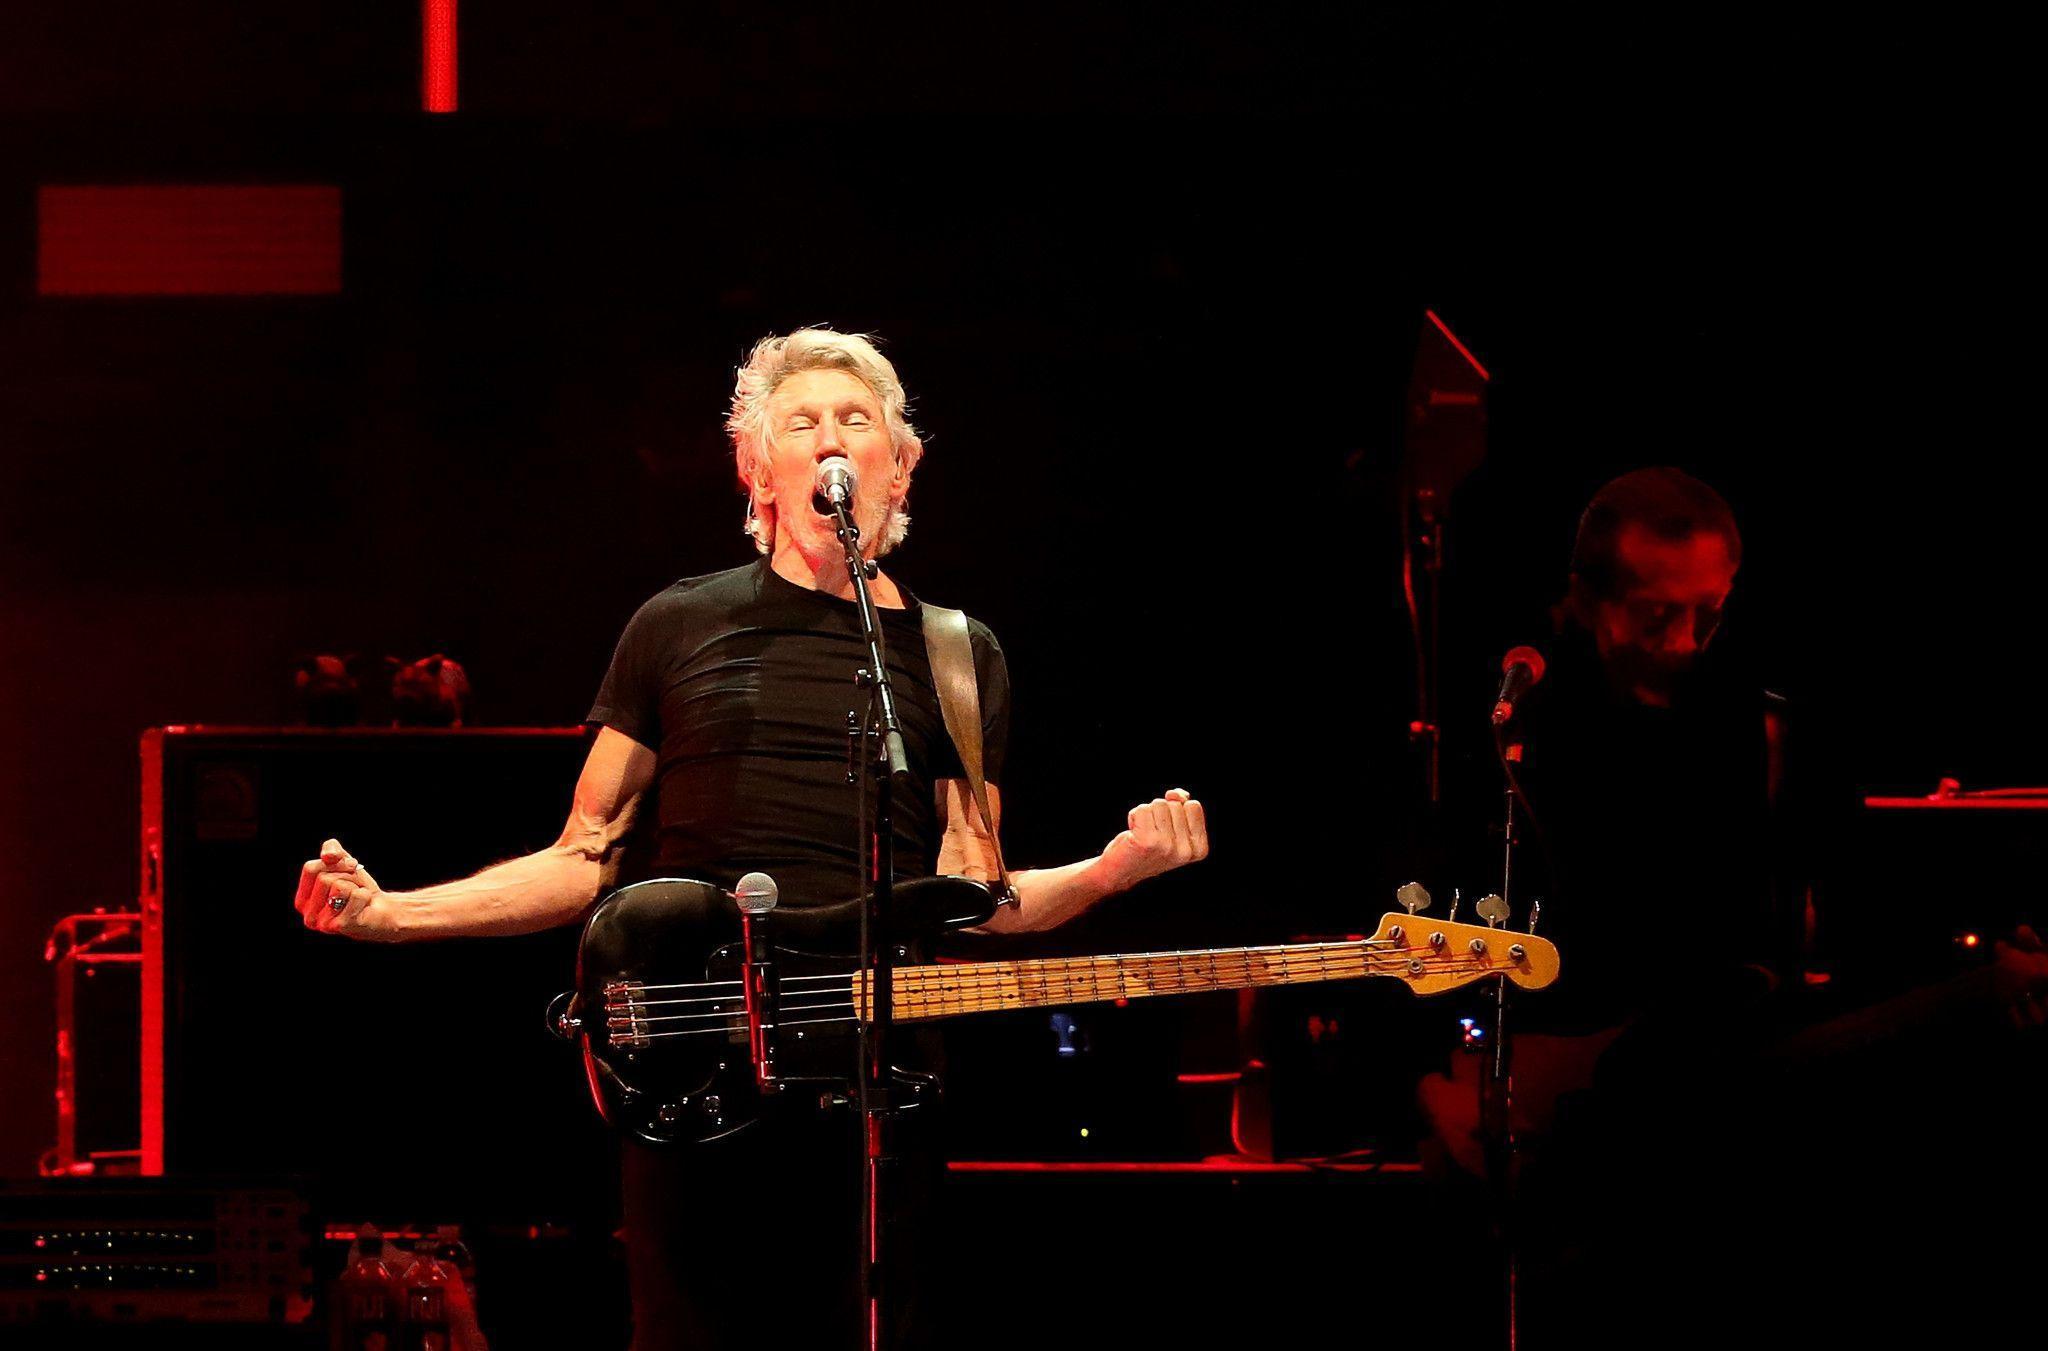 Roger Waters Wallpaper Image Photo Picture Background